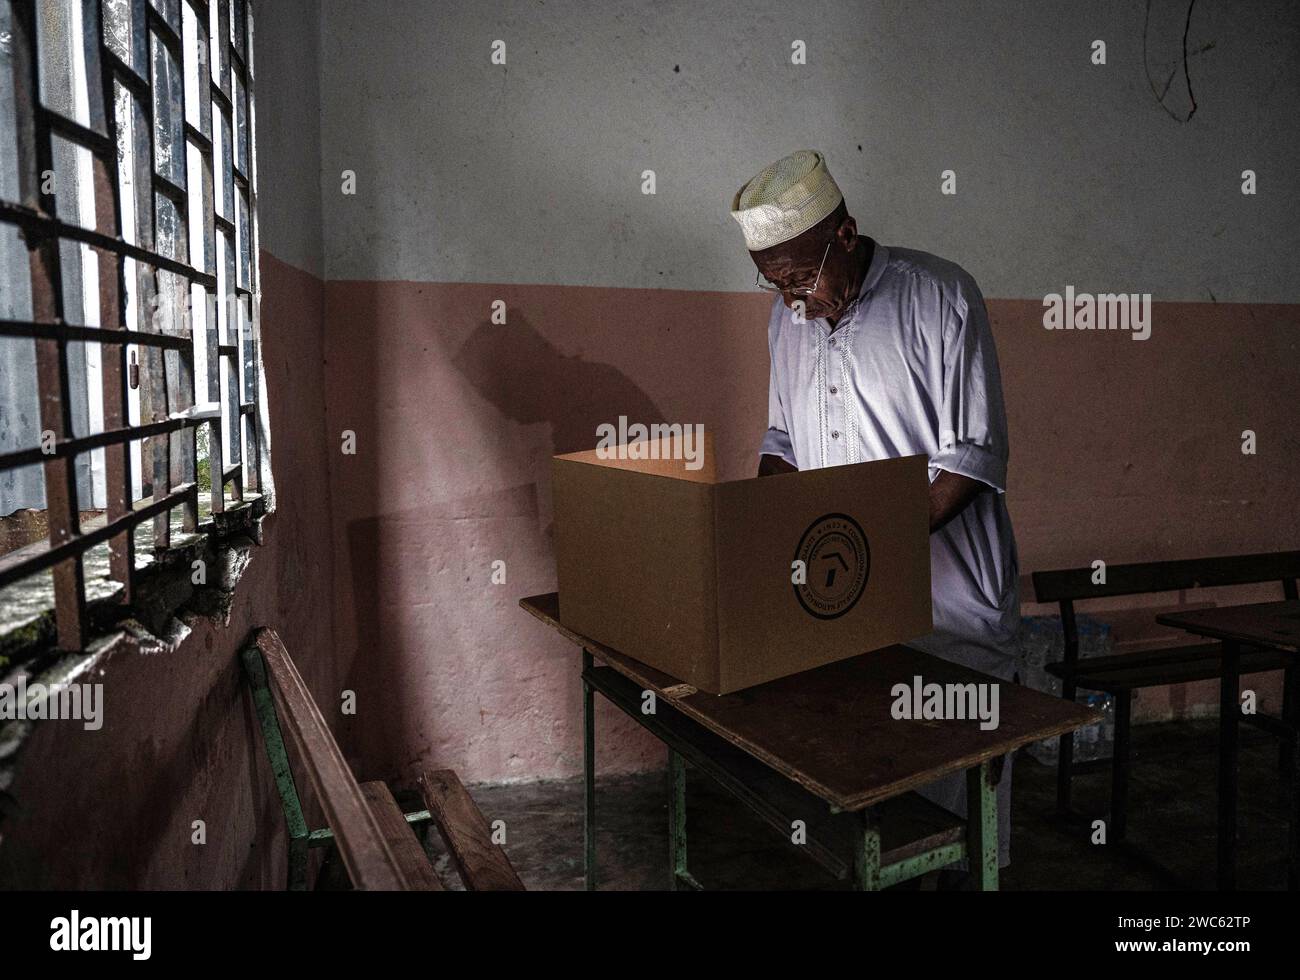 (240114) -- MITSUDJE, Jan. 14, 2024 (Xinhua) -- A man votes at a polling station in Mitsudje, Comoros, Jan. 14, 2024. Comoros kicked off its first round of the presidential election on Sunday to select the national leader from among six candidates, including incumbent President Azali Assoumani, for the next five years. (Xinhua/Wang Guansen) Stock Photo